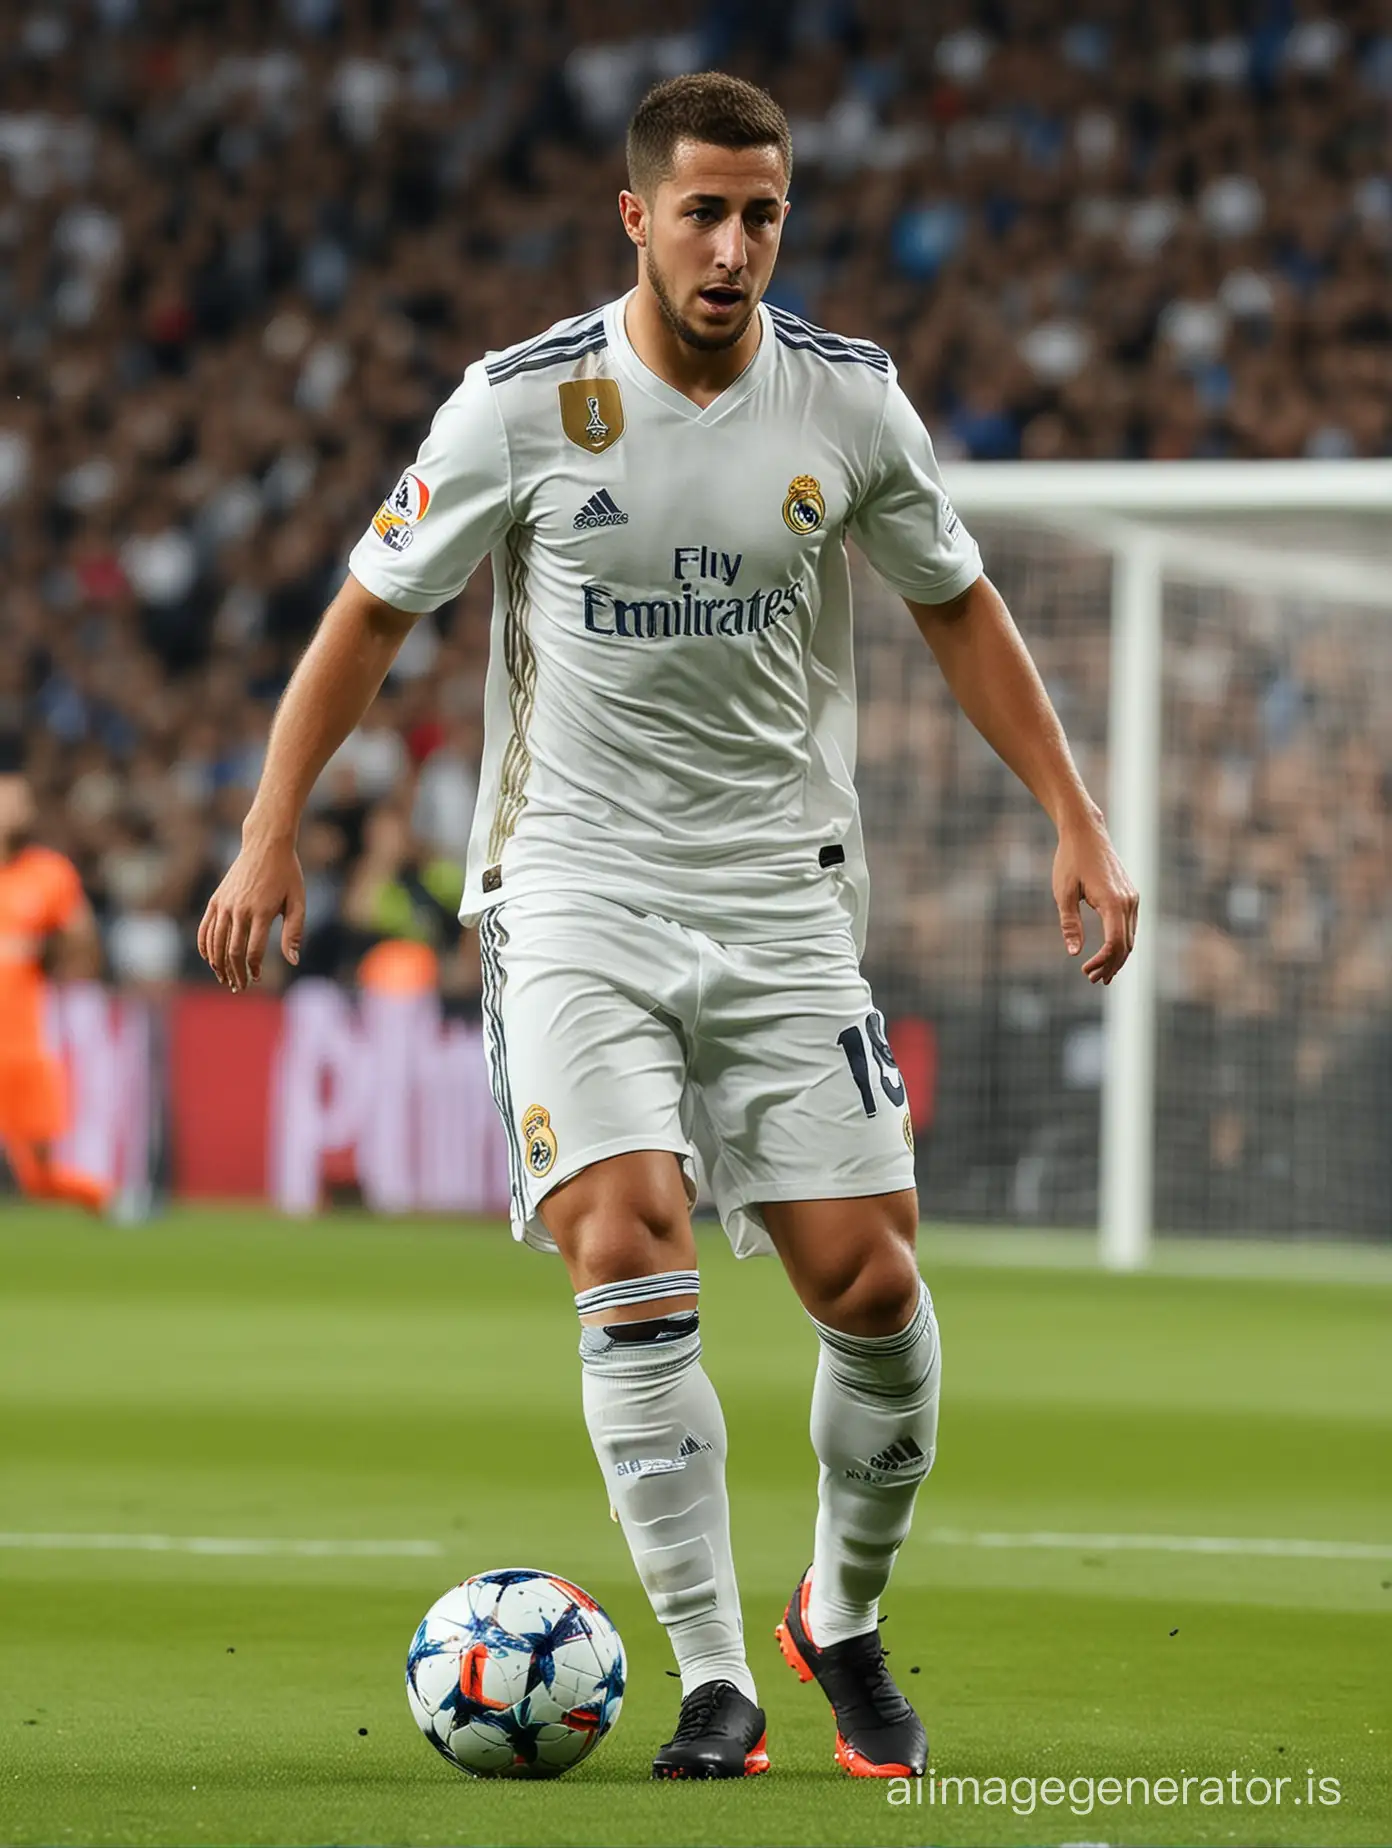 Eden Hazard at Real Madrid on the ball